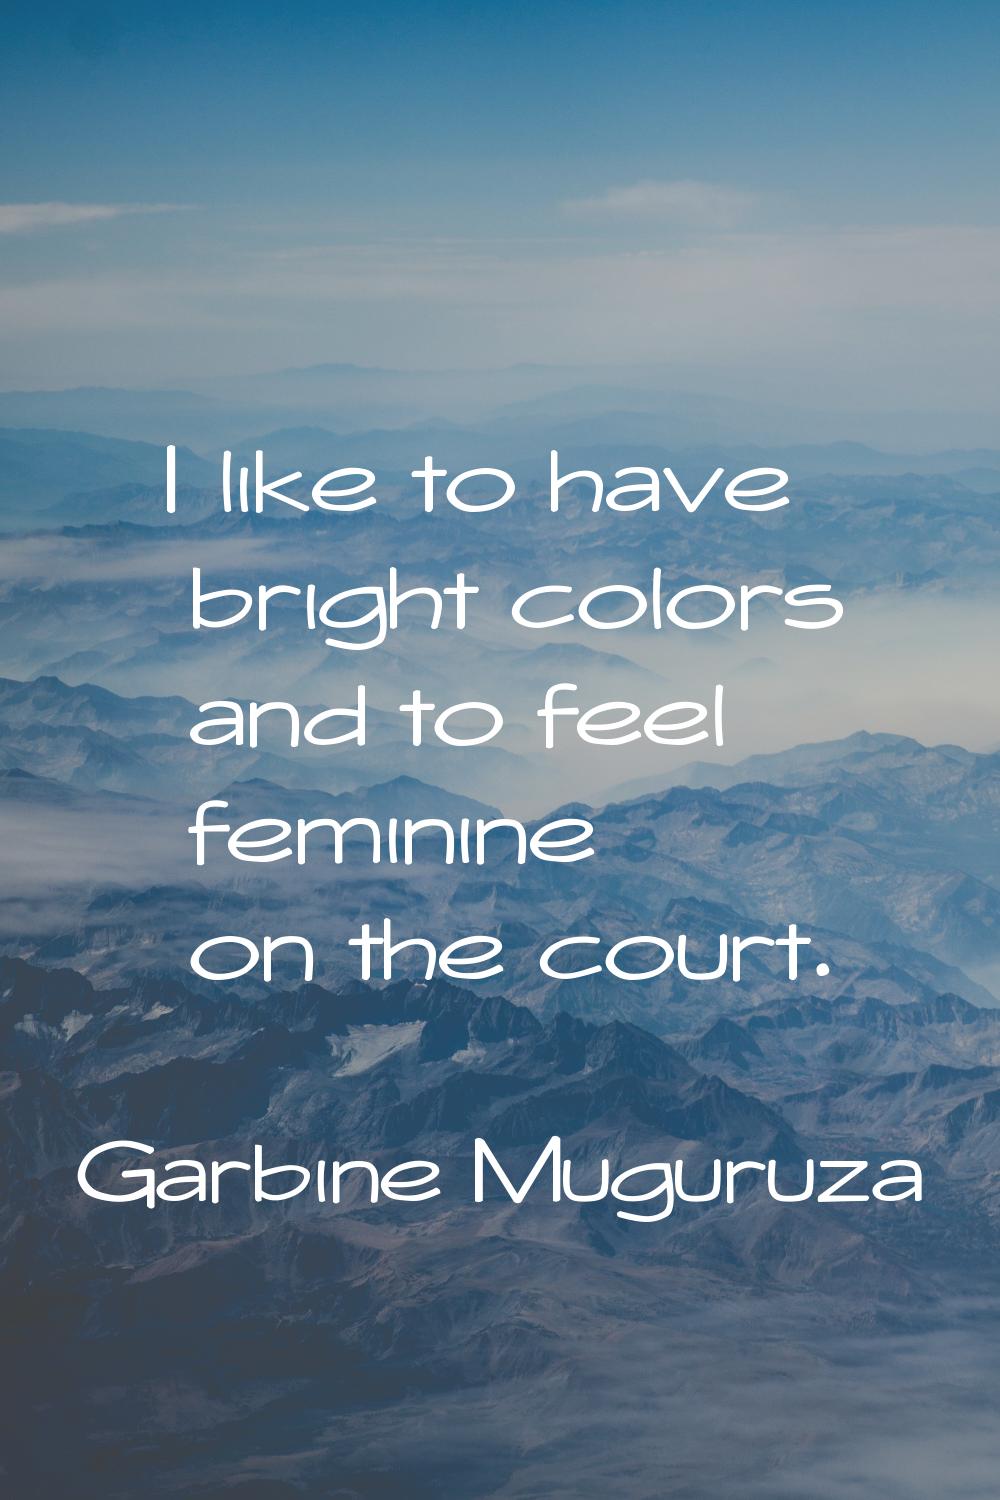 I like to have bright colors and to feel feminine on the court.